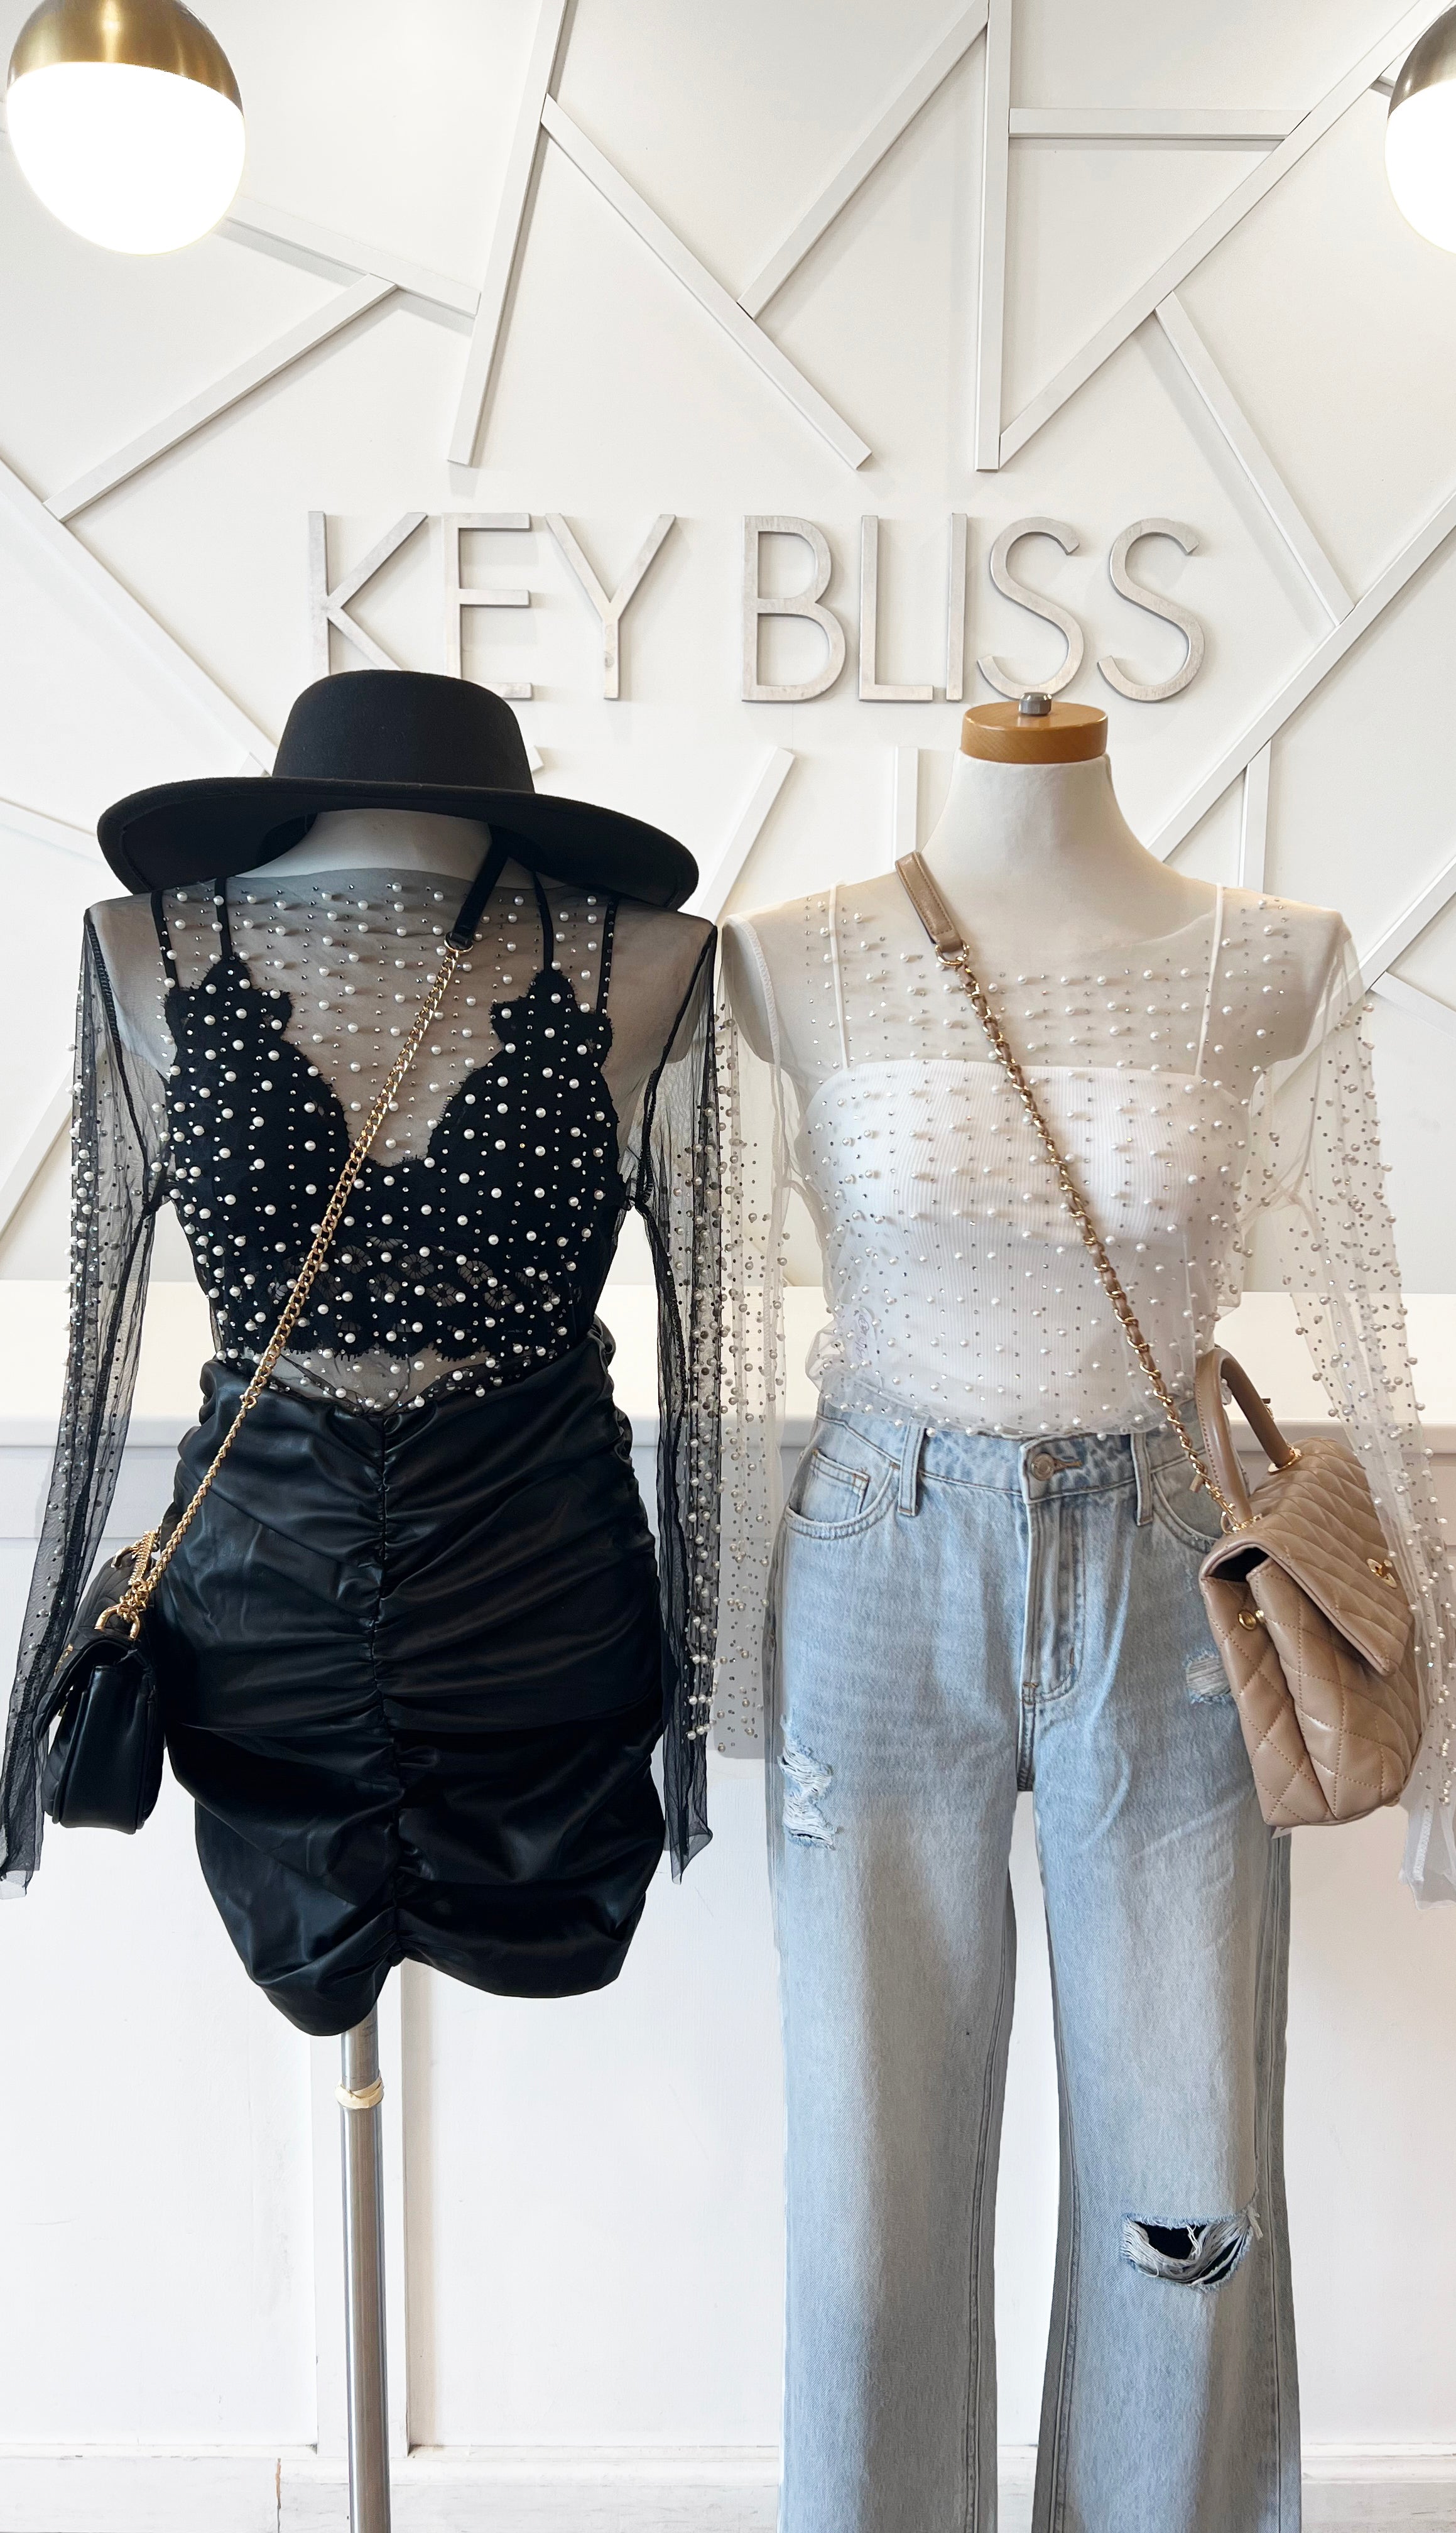 Night On The Town Beaded Mesh Crop Top